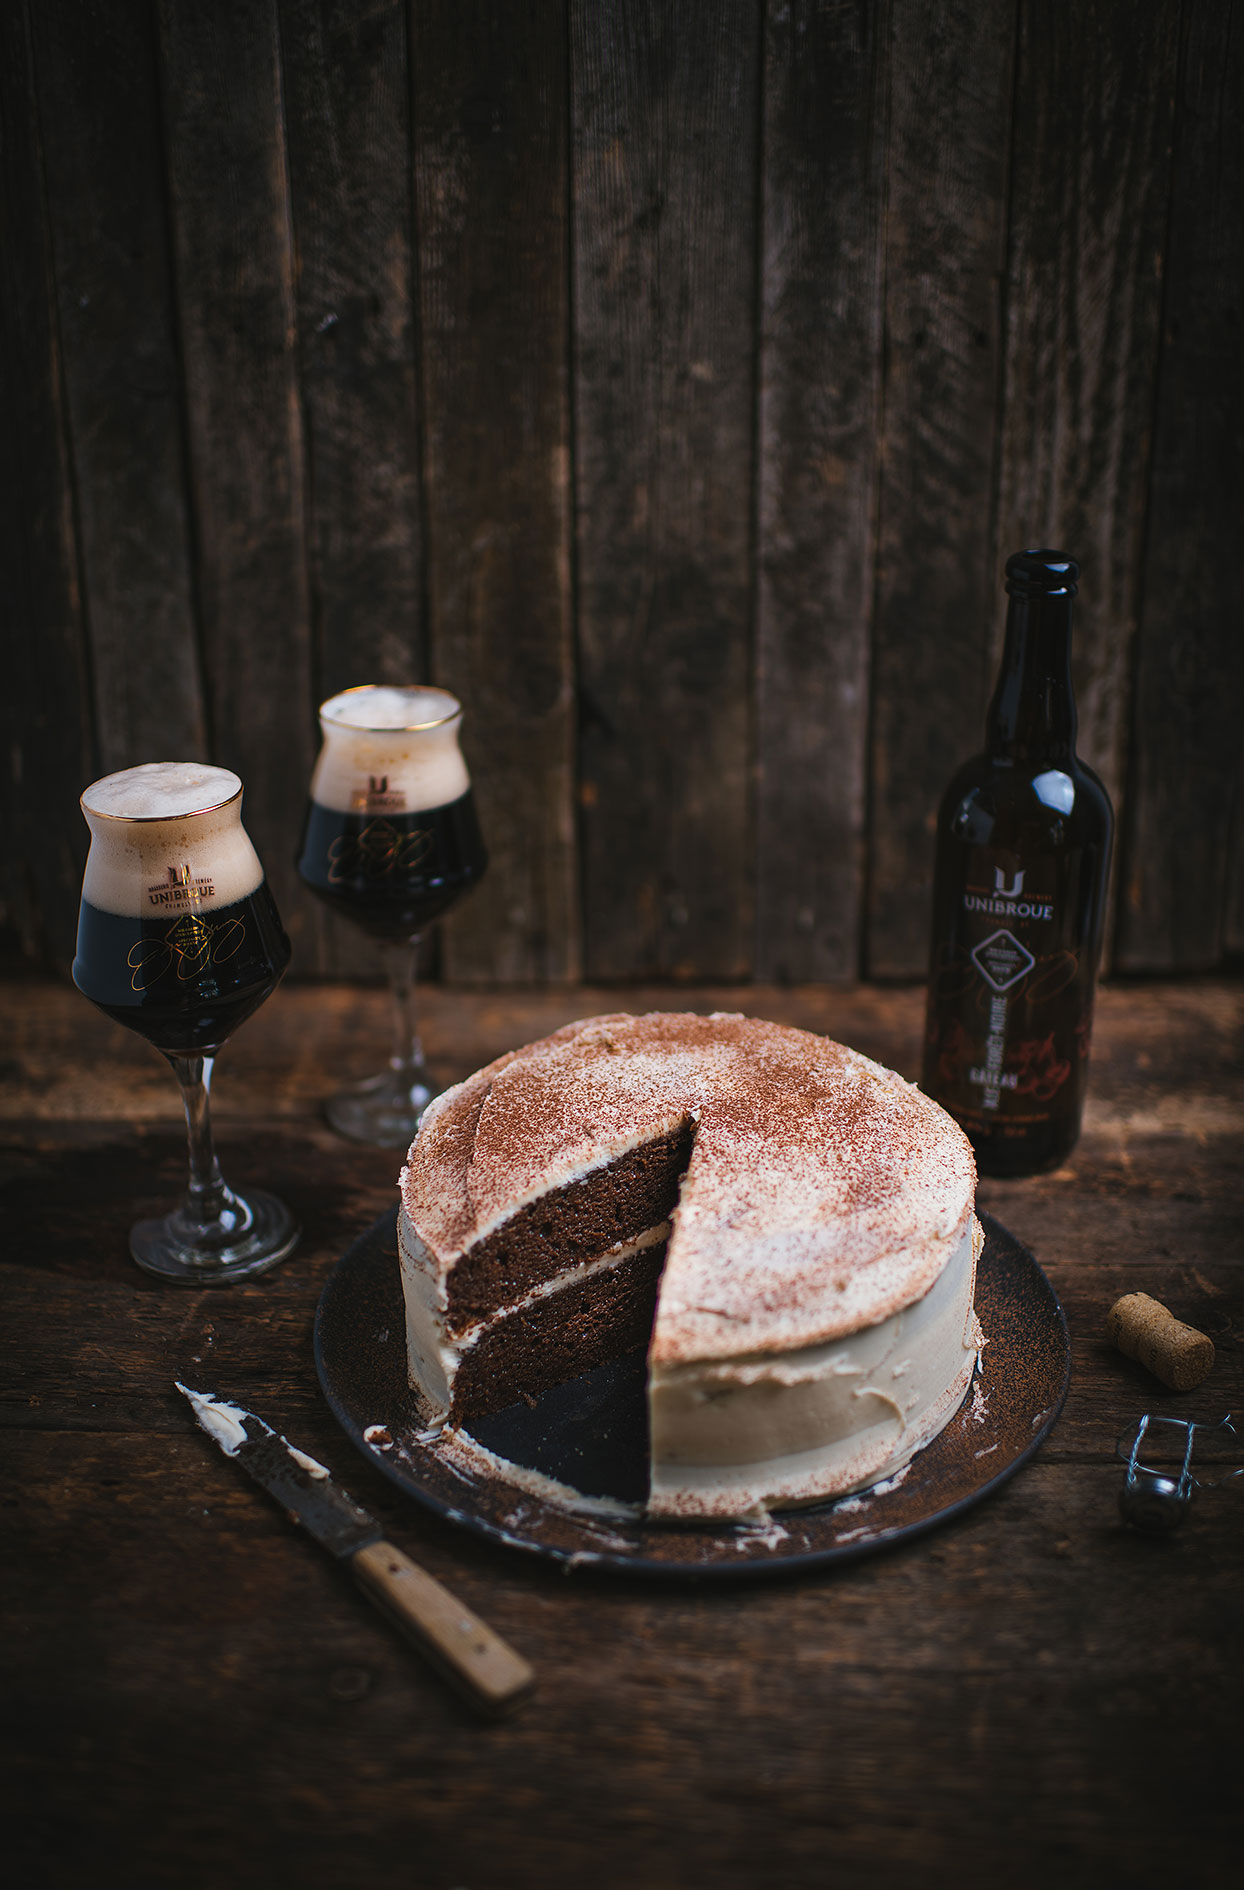 Chocolate cake with black forest ale beer